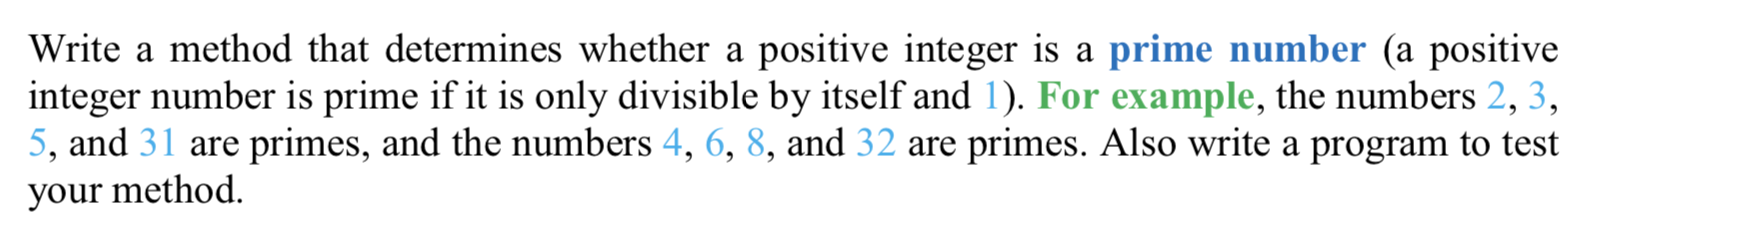 Write a method that determines whether a positive integer is a prime number (a positive integer number is prime if it is only